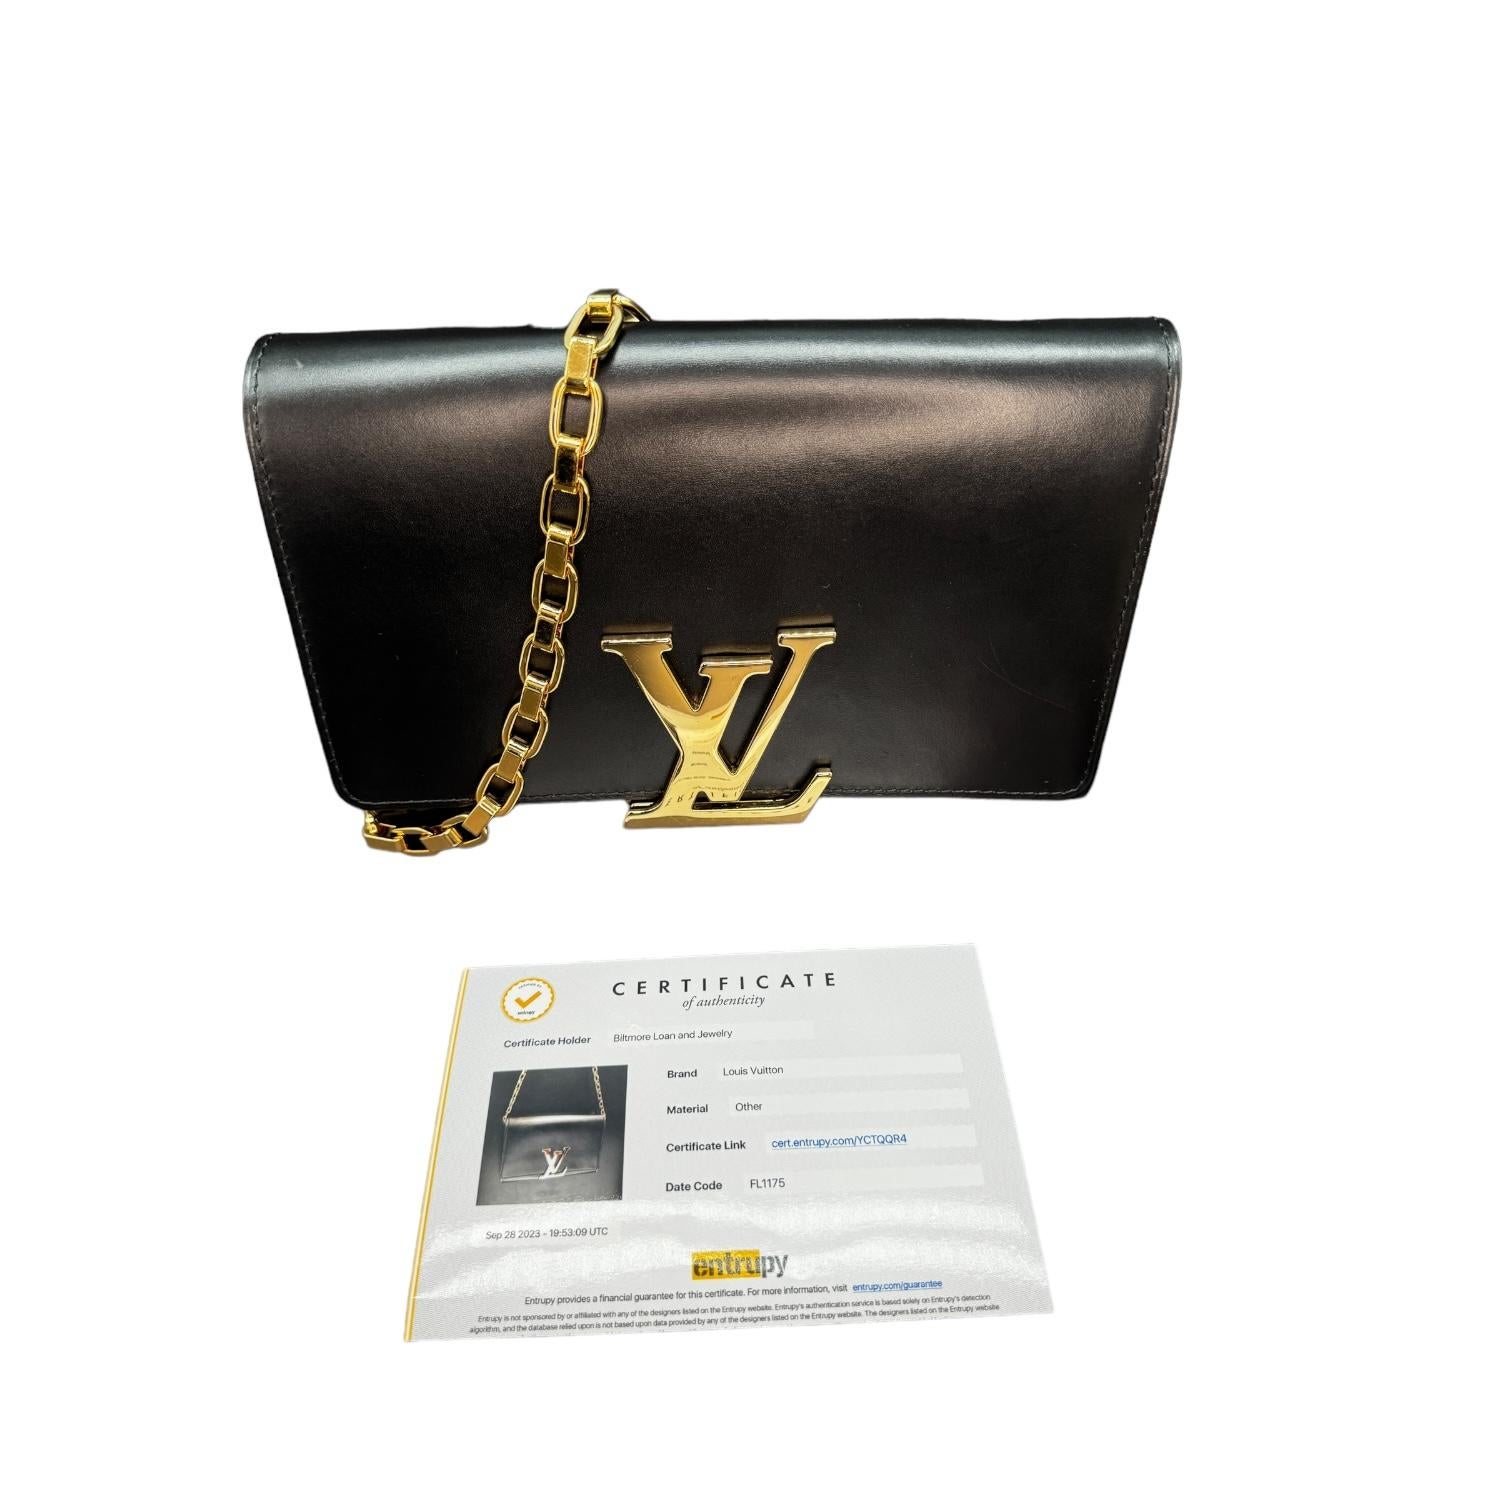 This Louis Vuitton GM bag is crafted of beautiful black leather with the Louis Vuitton monogram as the folding snap closure. The bag features a Dual interior pocket and one interior coin-zip pocket along with a luxurious Alcantra and suede interior